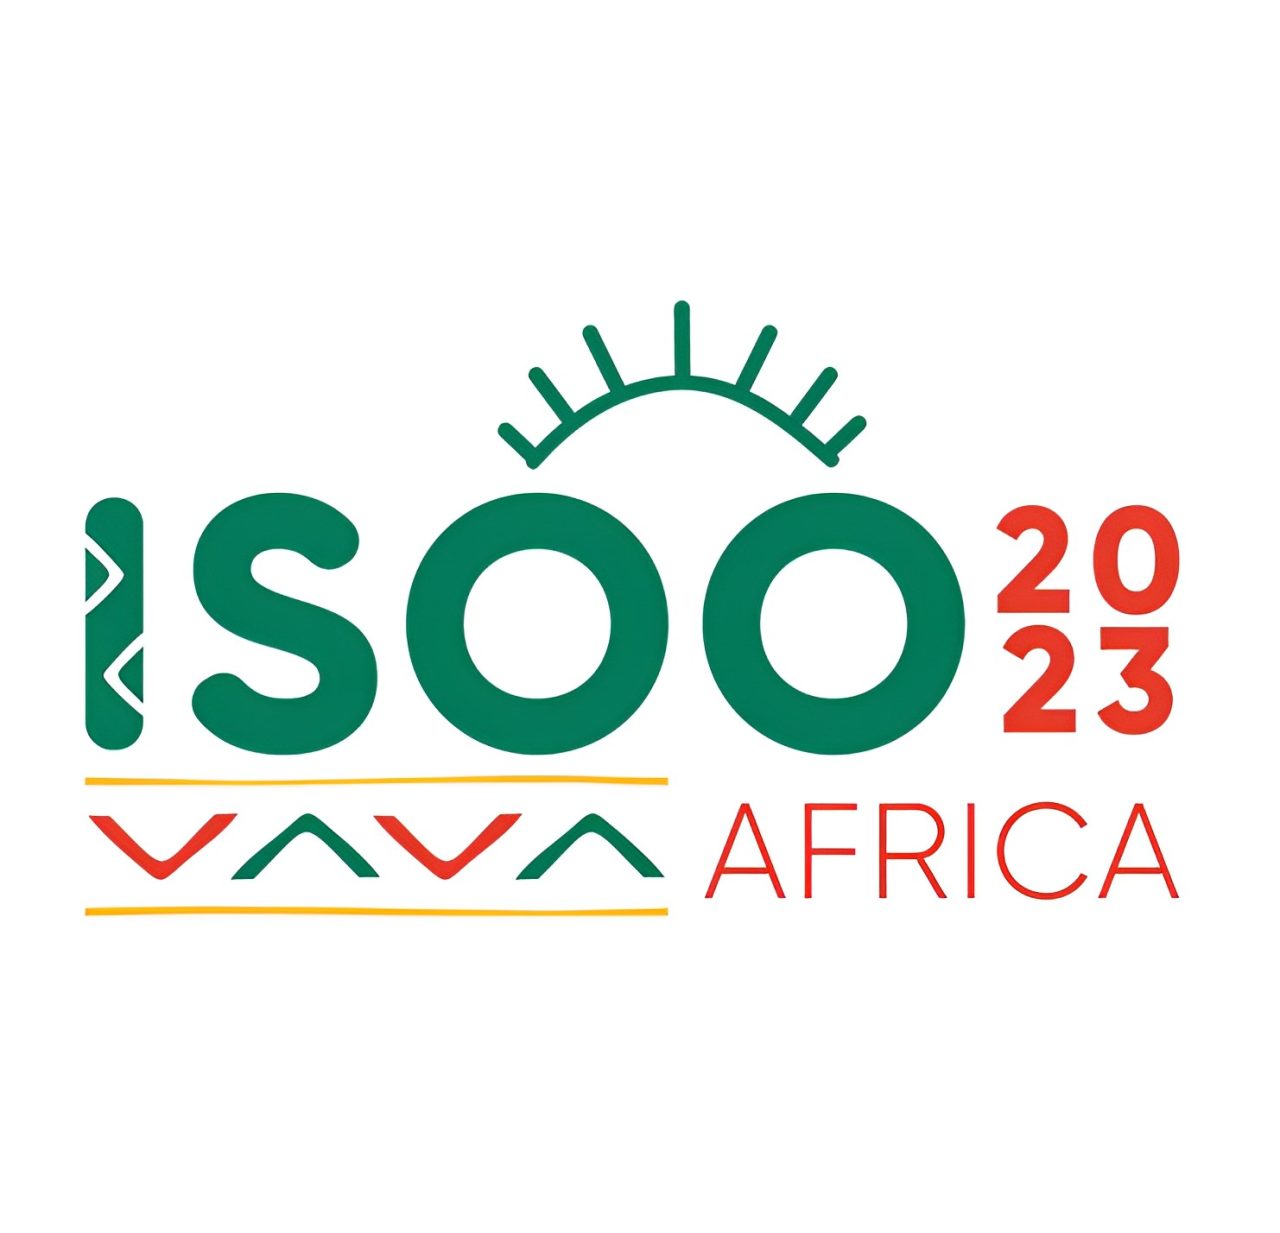 We are excited to inform you about the upcoming ISOO AFRICA conference taking place in Mombasa, Kenya from August 21-23, 2023 – Ido Didi Fabian